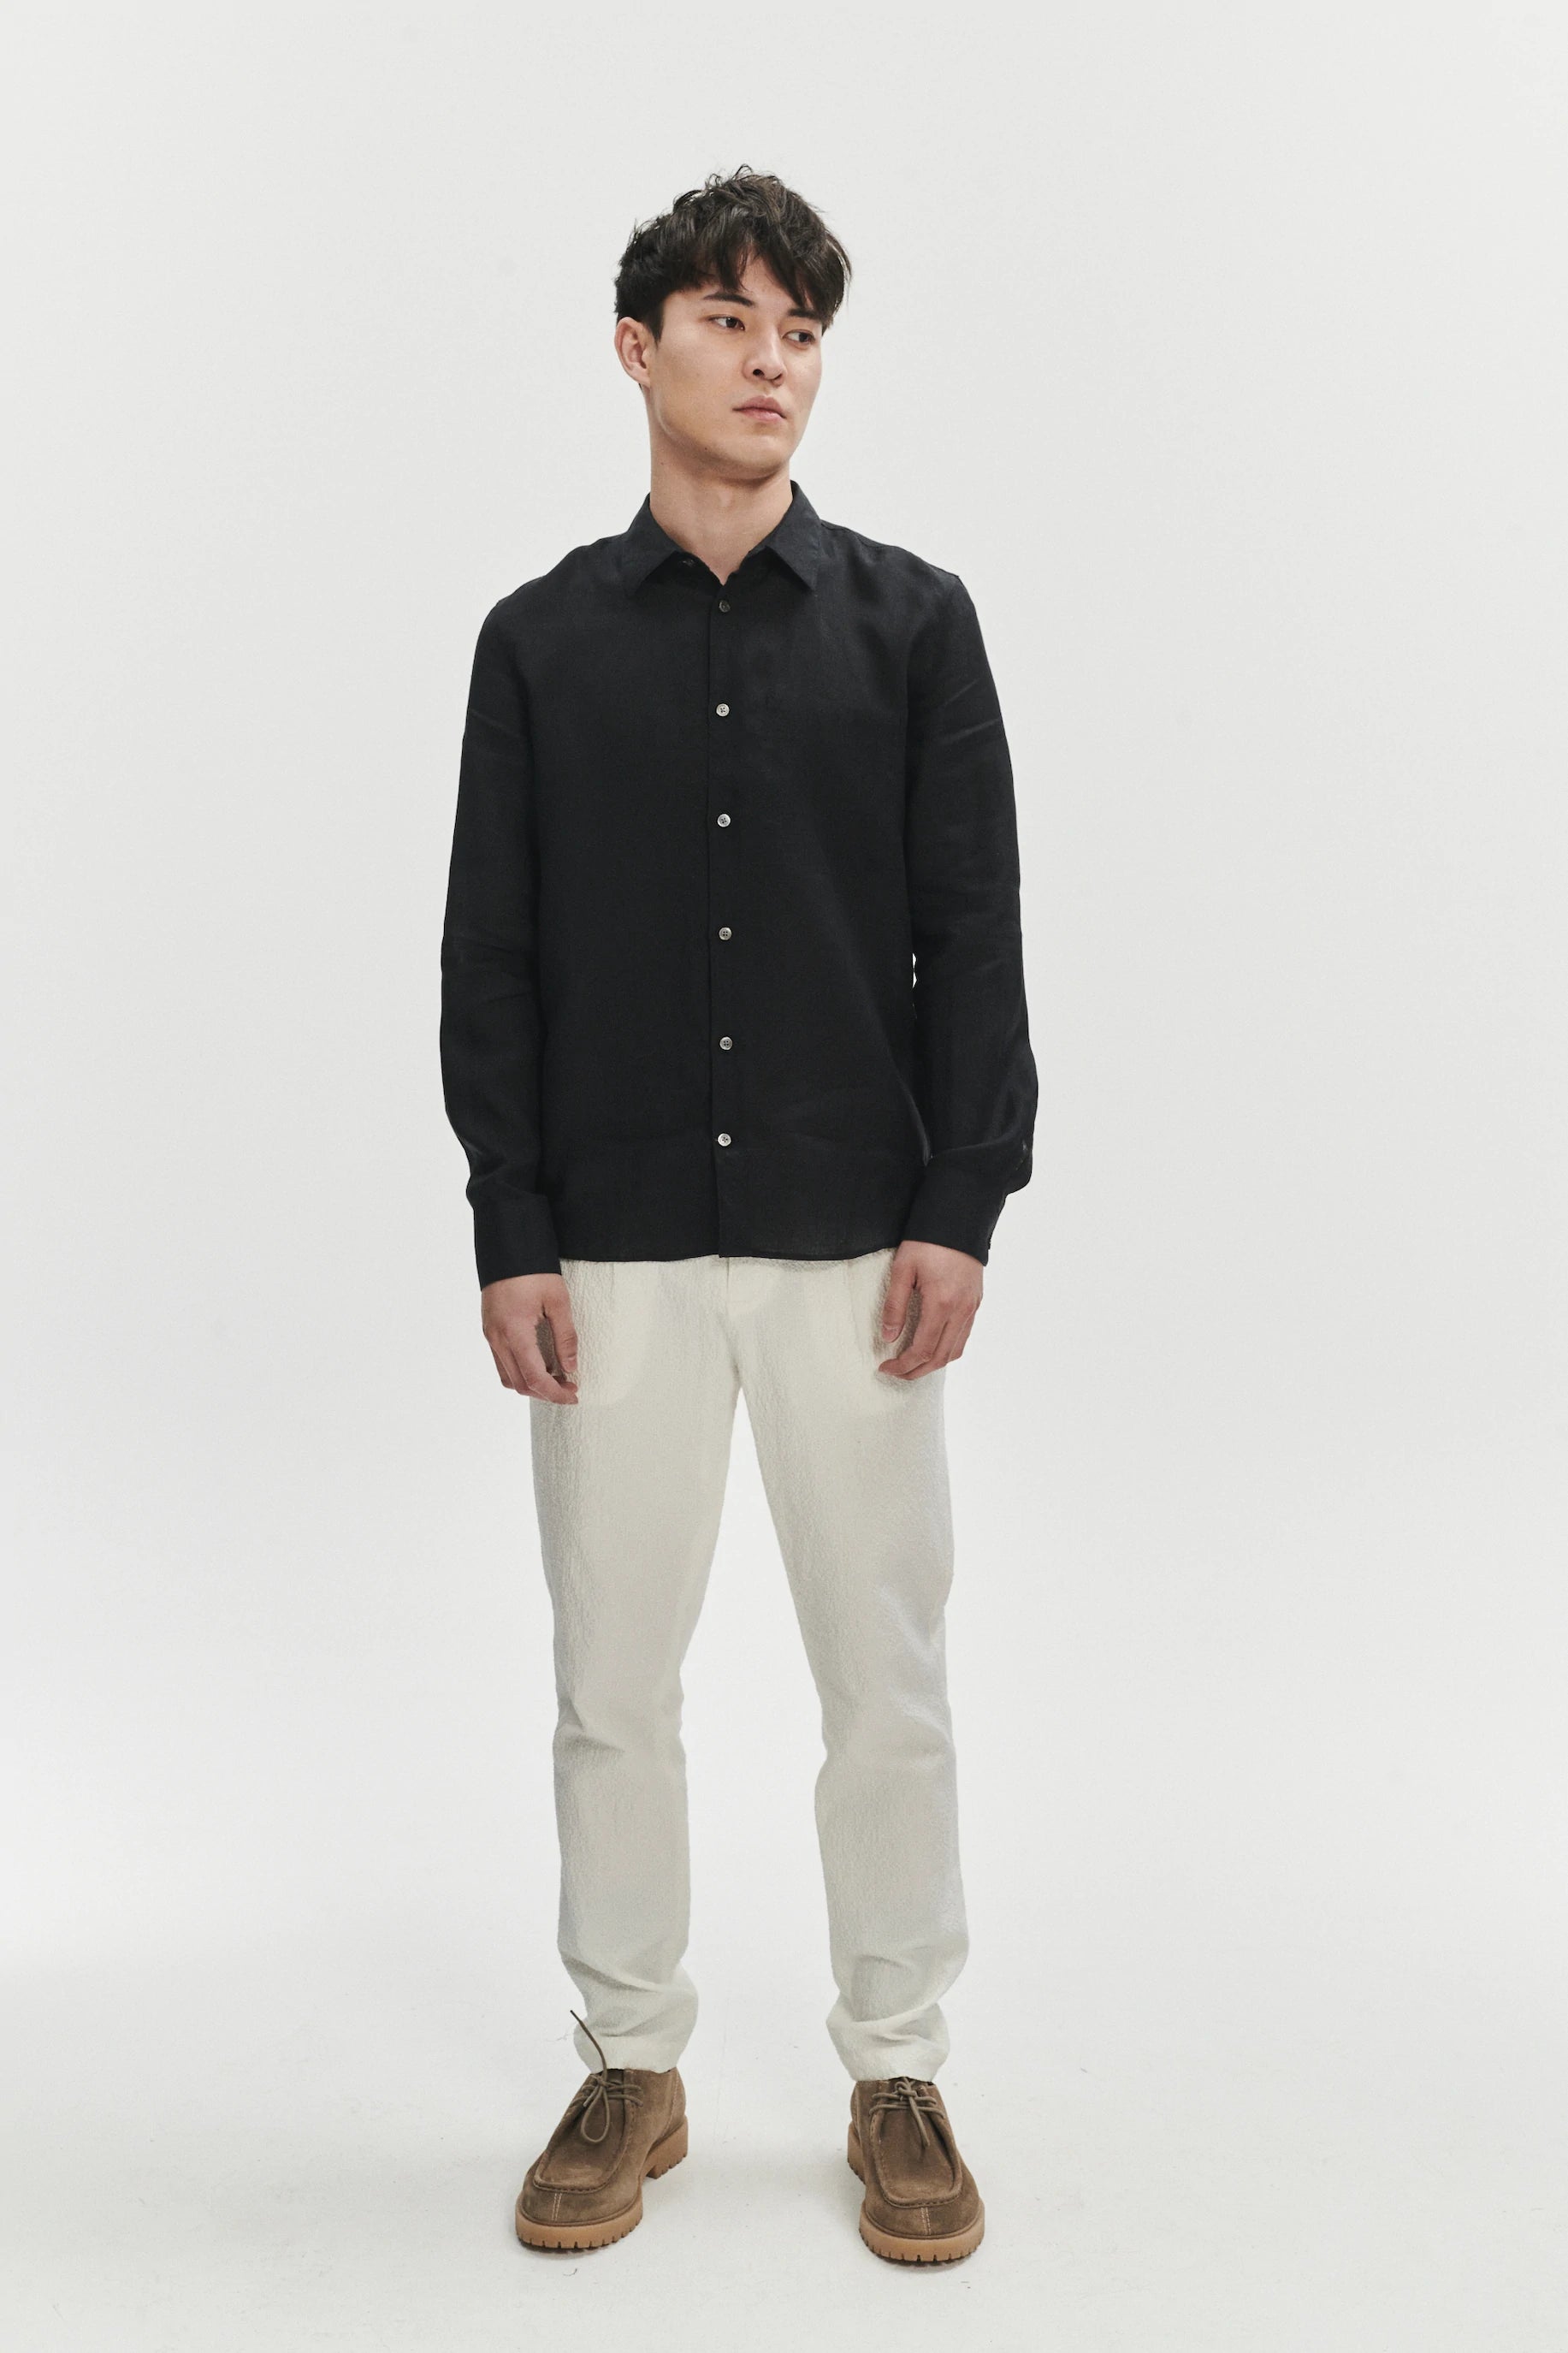 feel-good-shirt-in-a-soft-and-airy-black-portuguese-linen